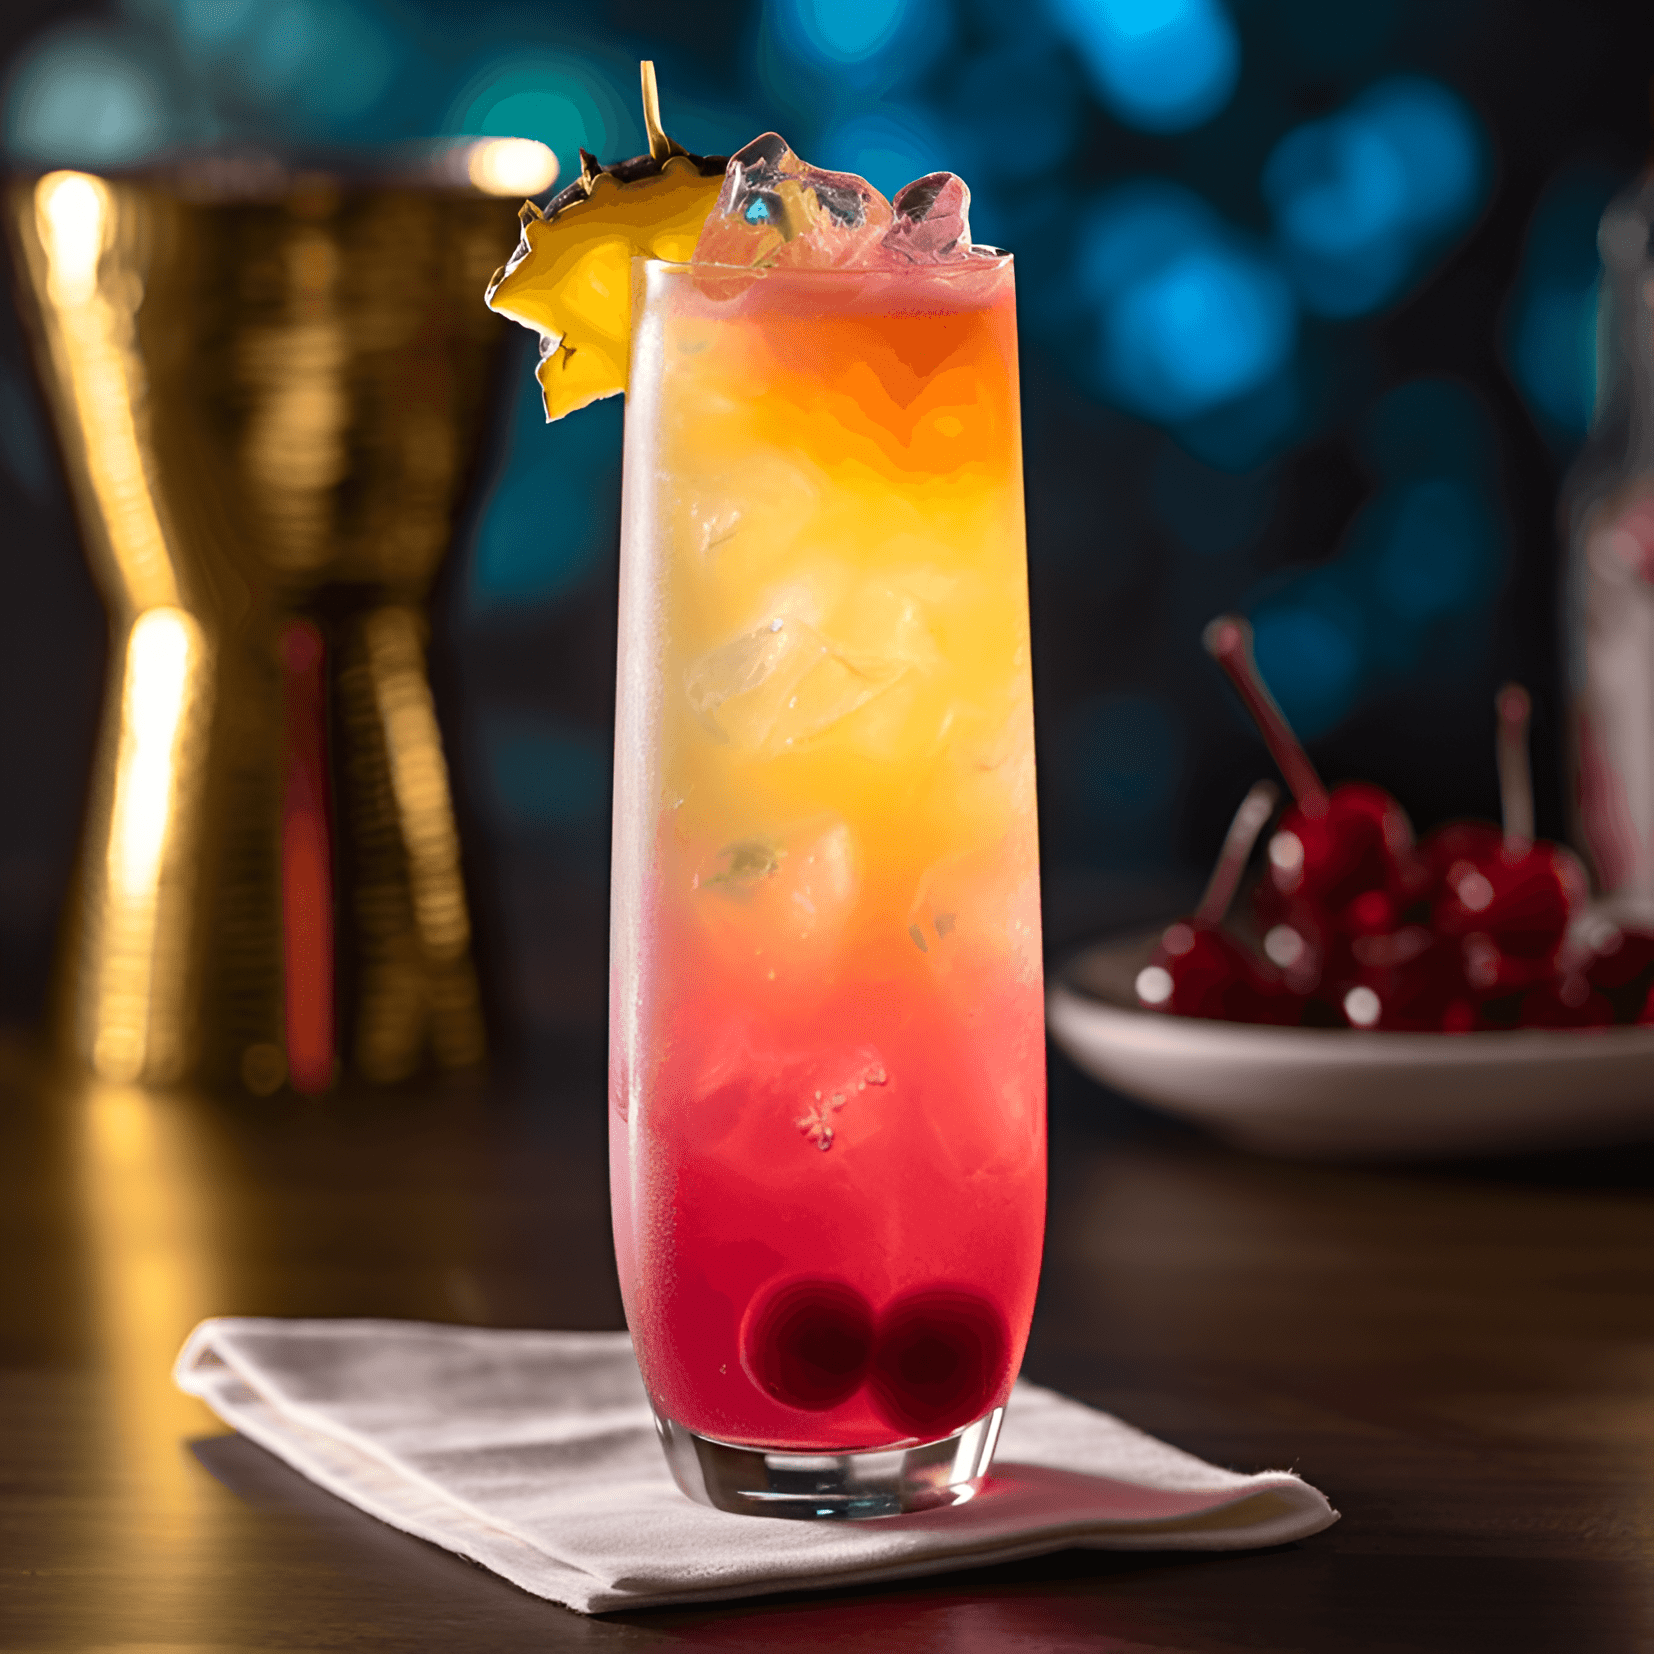 Cinderella Recipe - The Cinderella cocktail offers a delightful mix of sweet and sour flavors, with a light and refreshing taste. The combination of fruit juices creates a tropical sensation, while the ginger ale adds a subtle fizziness.